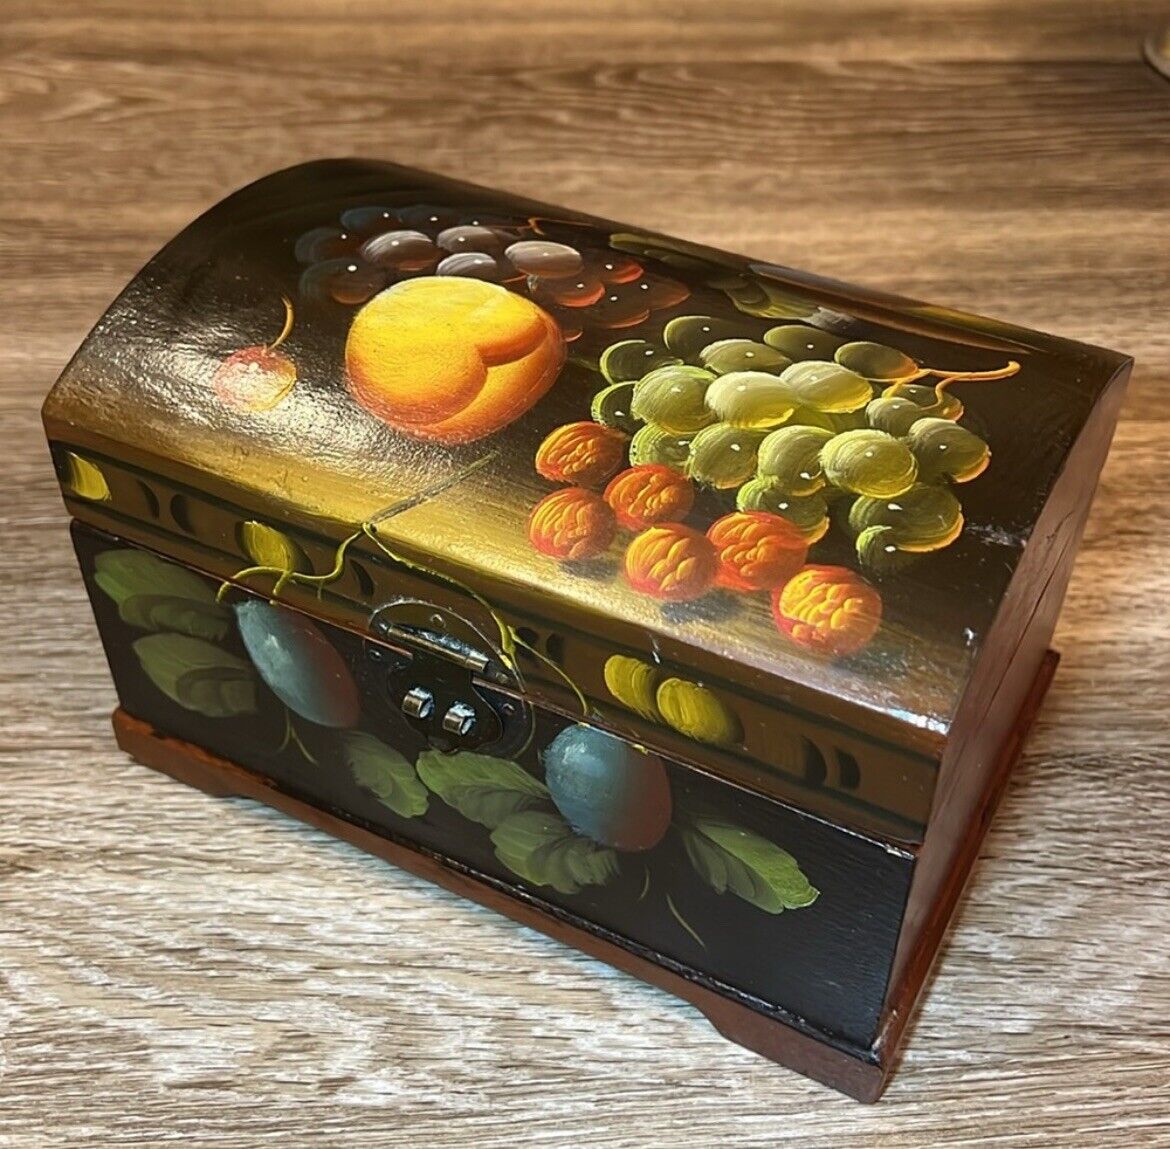 Vintage Hand Painted Tole Ware Footed Wood Chest Hand Painted Fruit Still Life